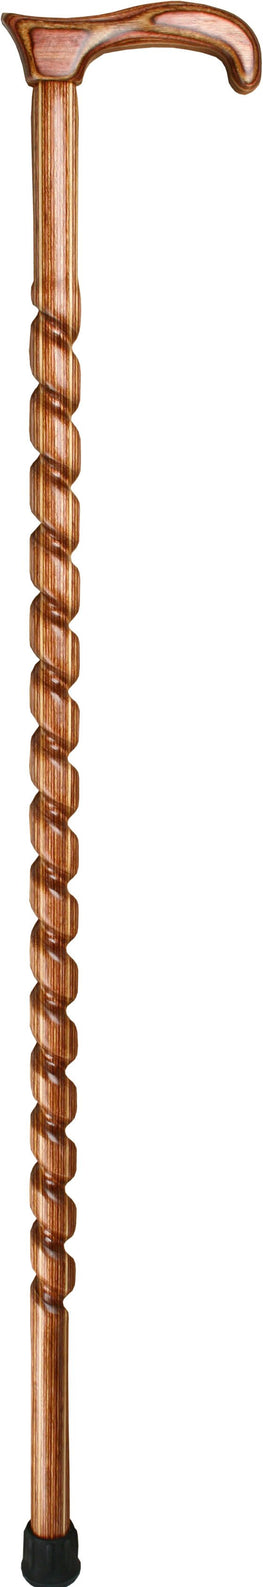 American Woodcrafter Colortone - Rope Spiral - Bean Derby Walking Cane With Laminated Birchwood Shaft